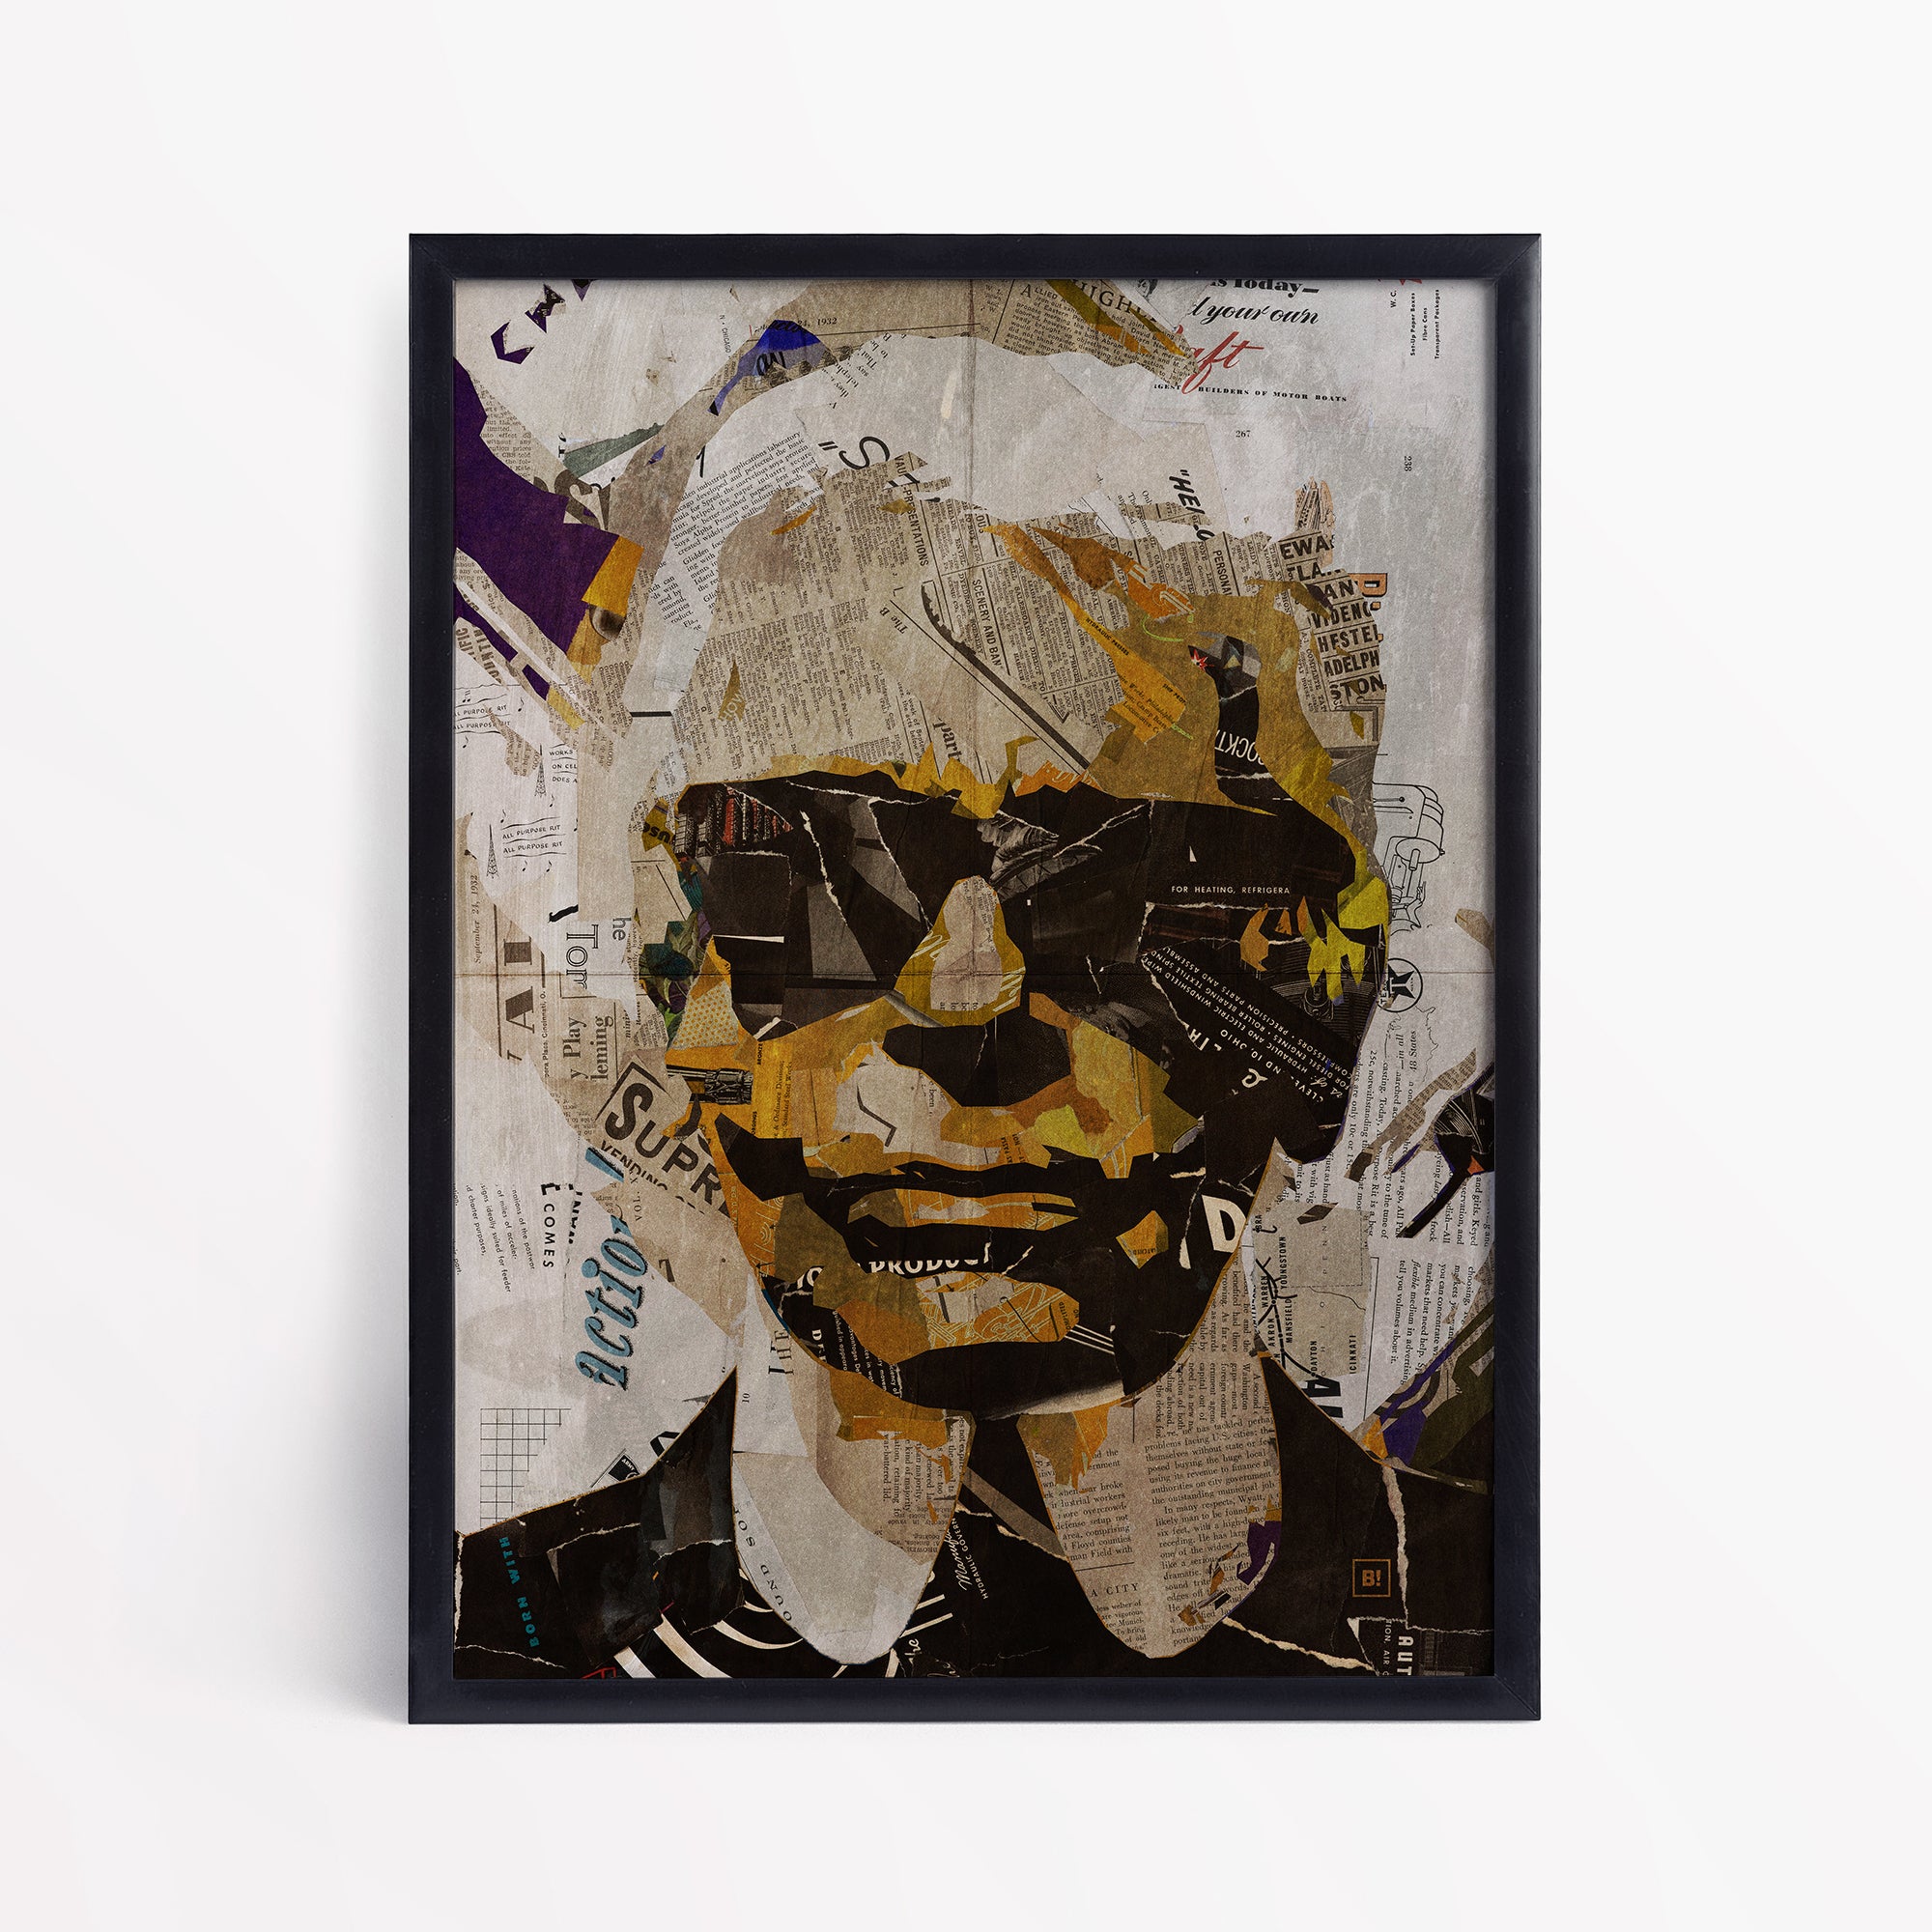 Be inspired by our iconic collage portrait art print of Karl Lagerfeld. This artwork has been printed using the giclée process on archival acid-free paper and is presented in a sleek black frame, showcasing its timeless beauty in every detail.